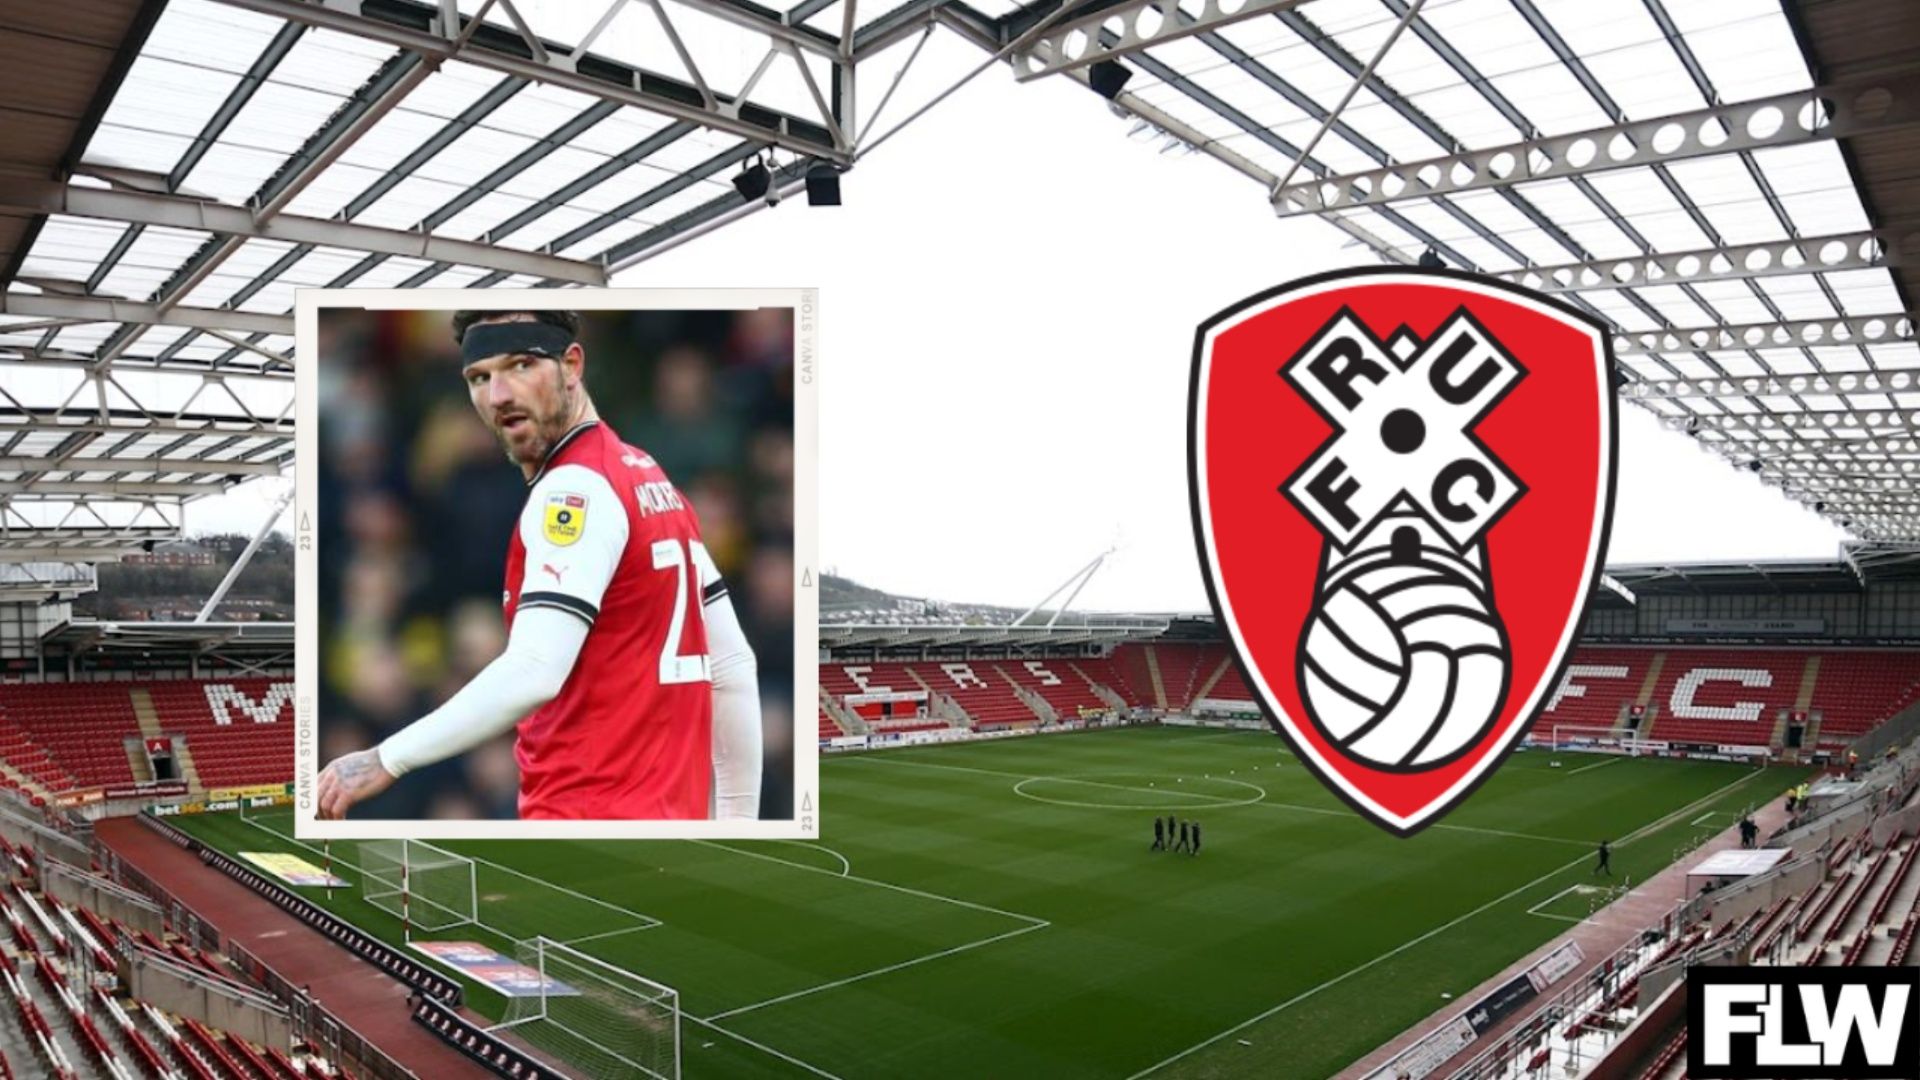 Who is Rotherham United’s highest earner?